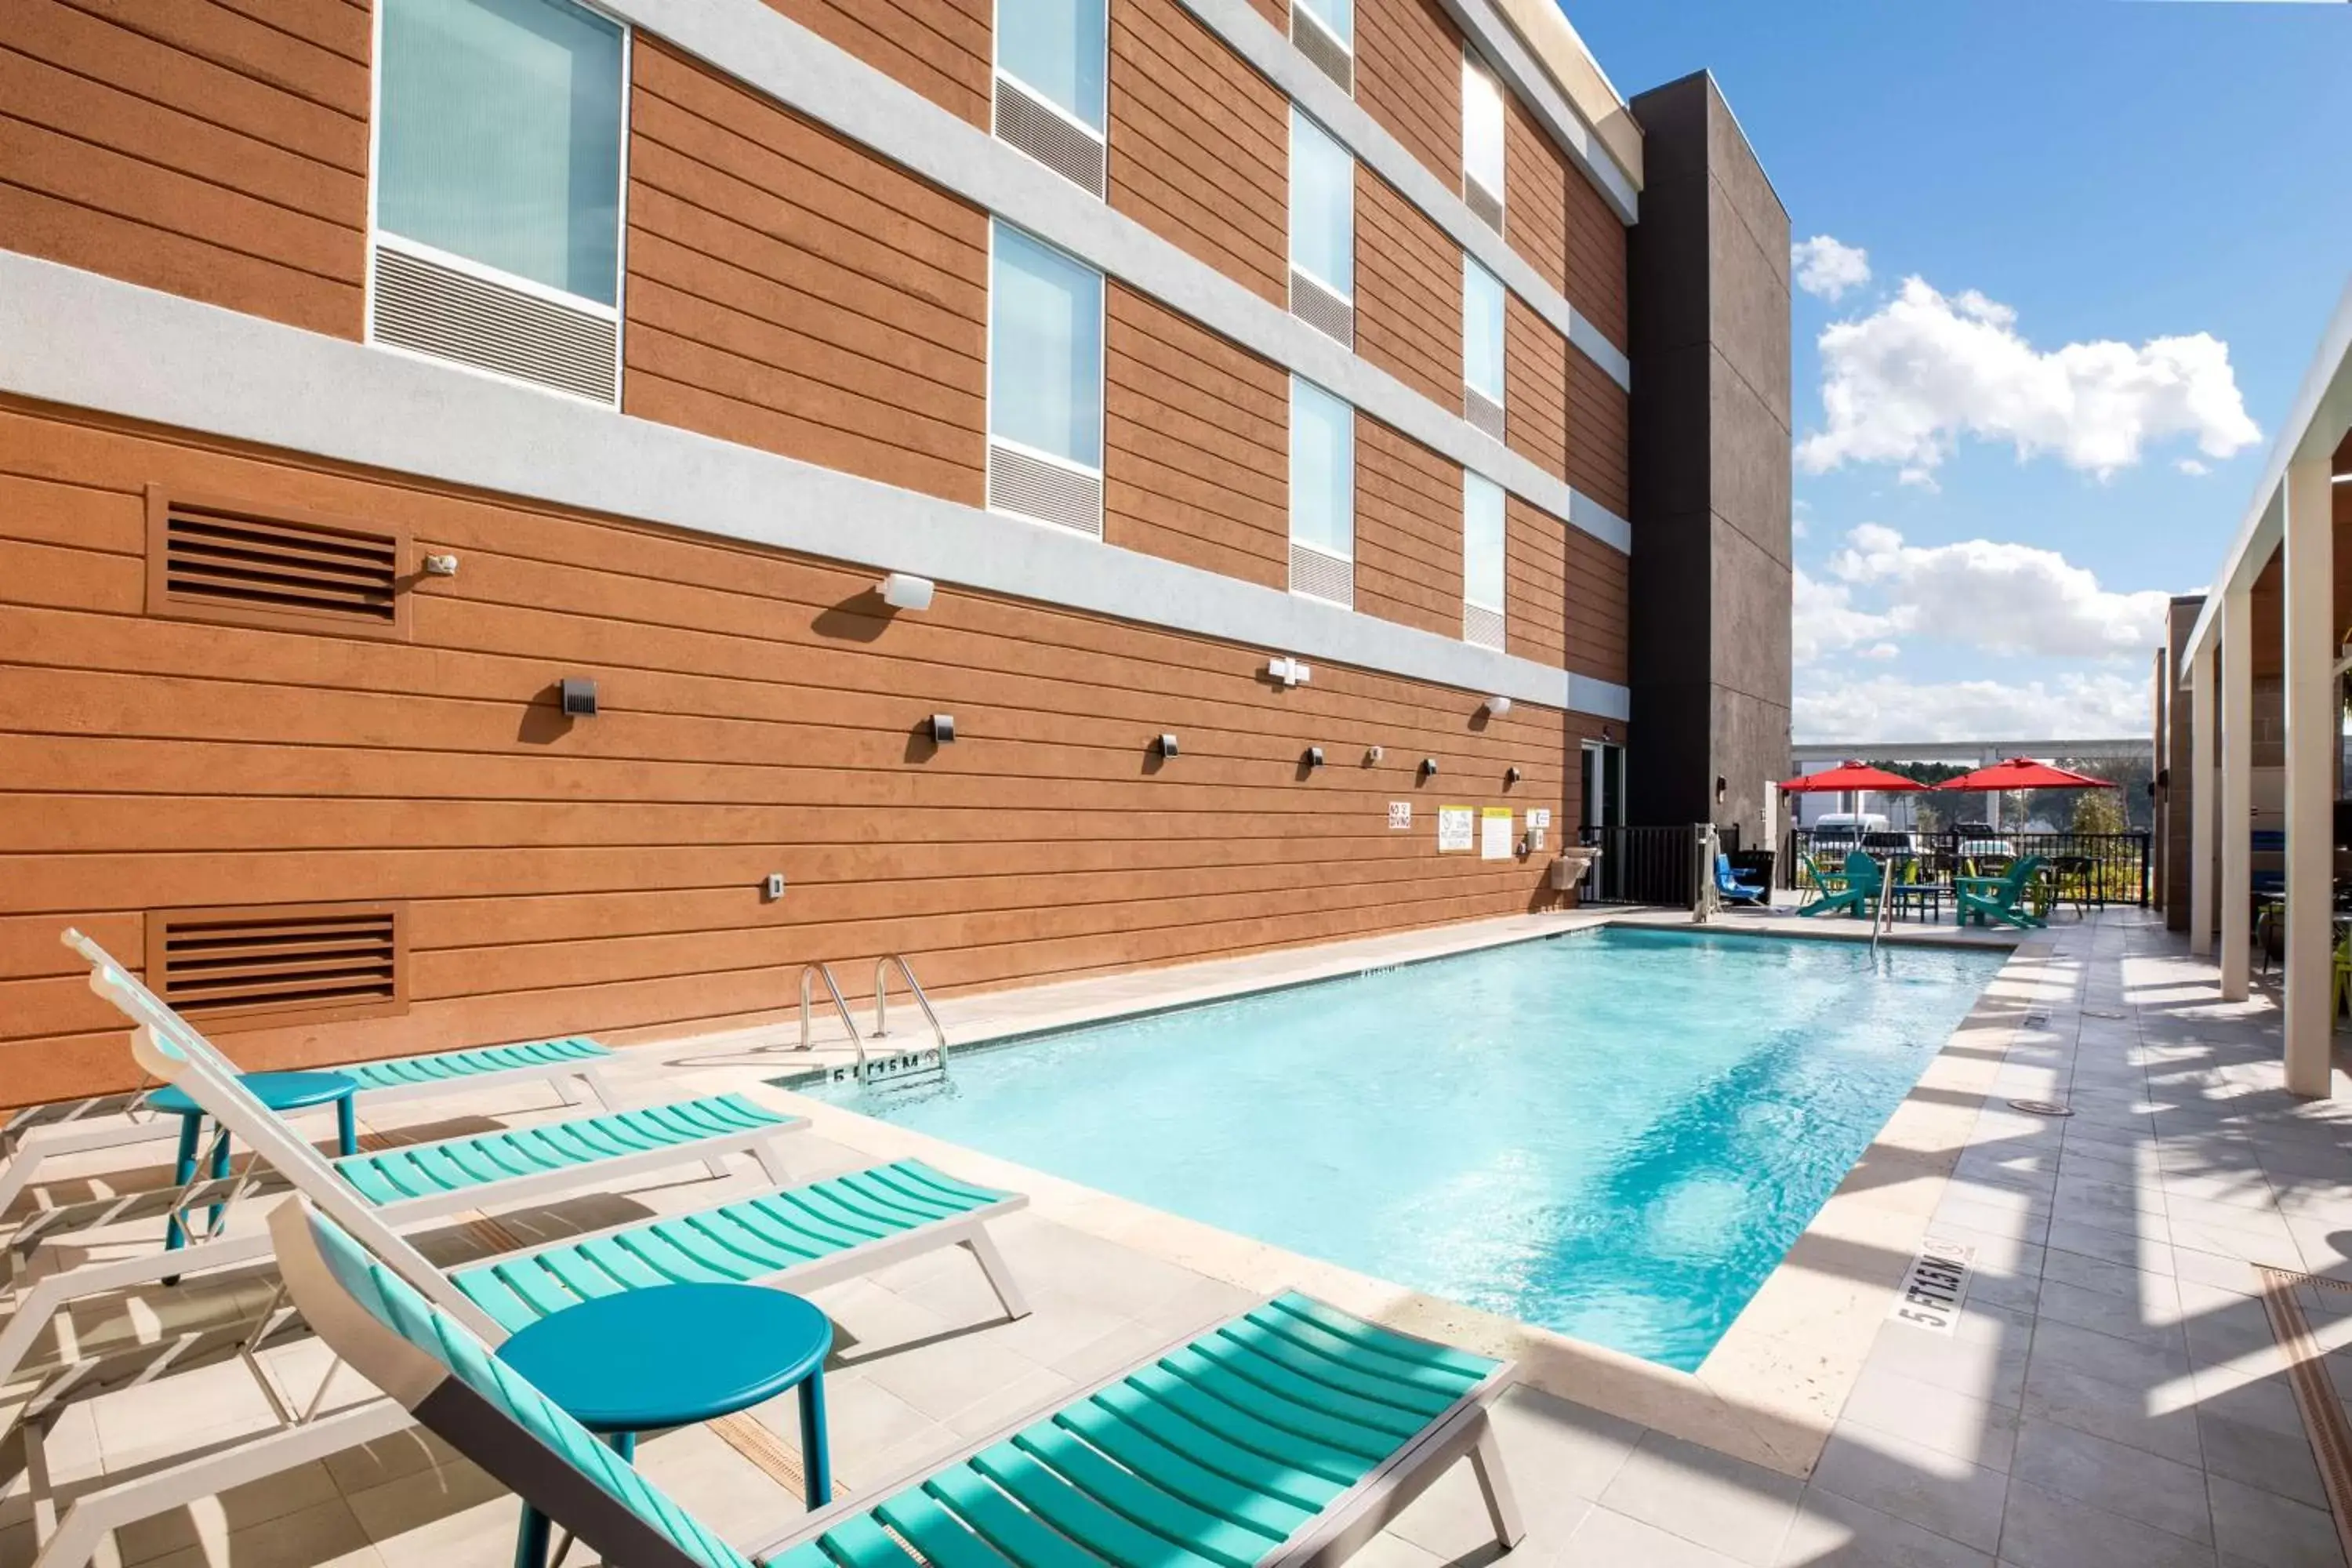 Swimming Pool in Home2 Suites by Hilton Houston Bush Intercontinental Airport Iah Beltway 8